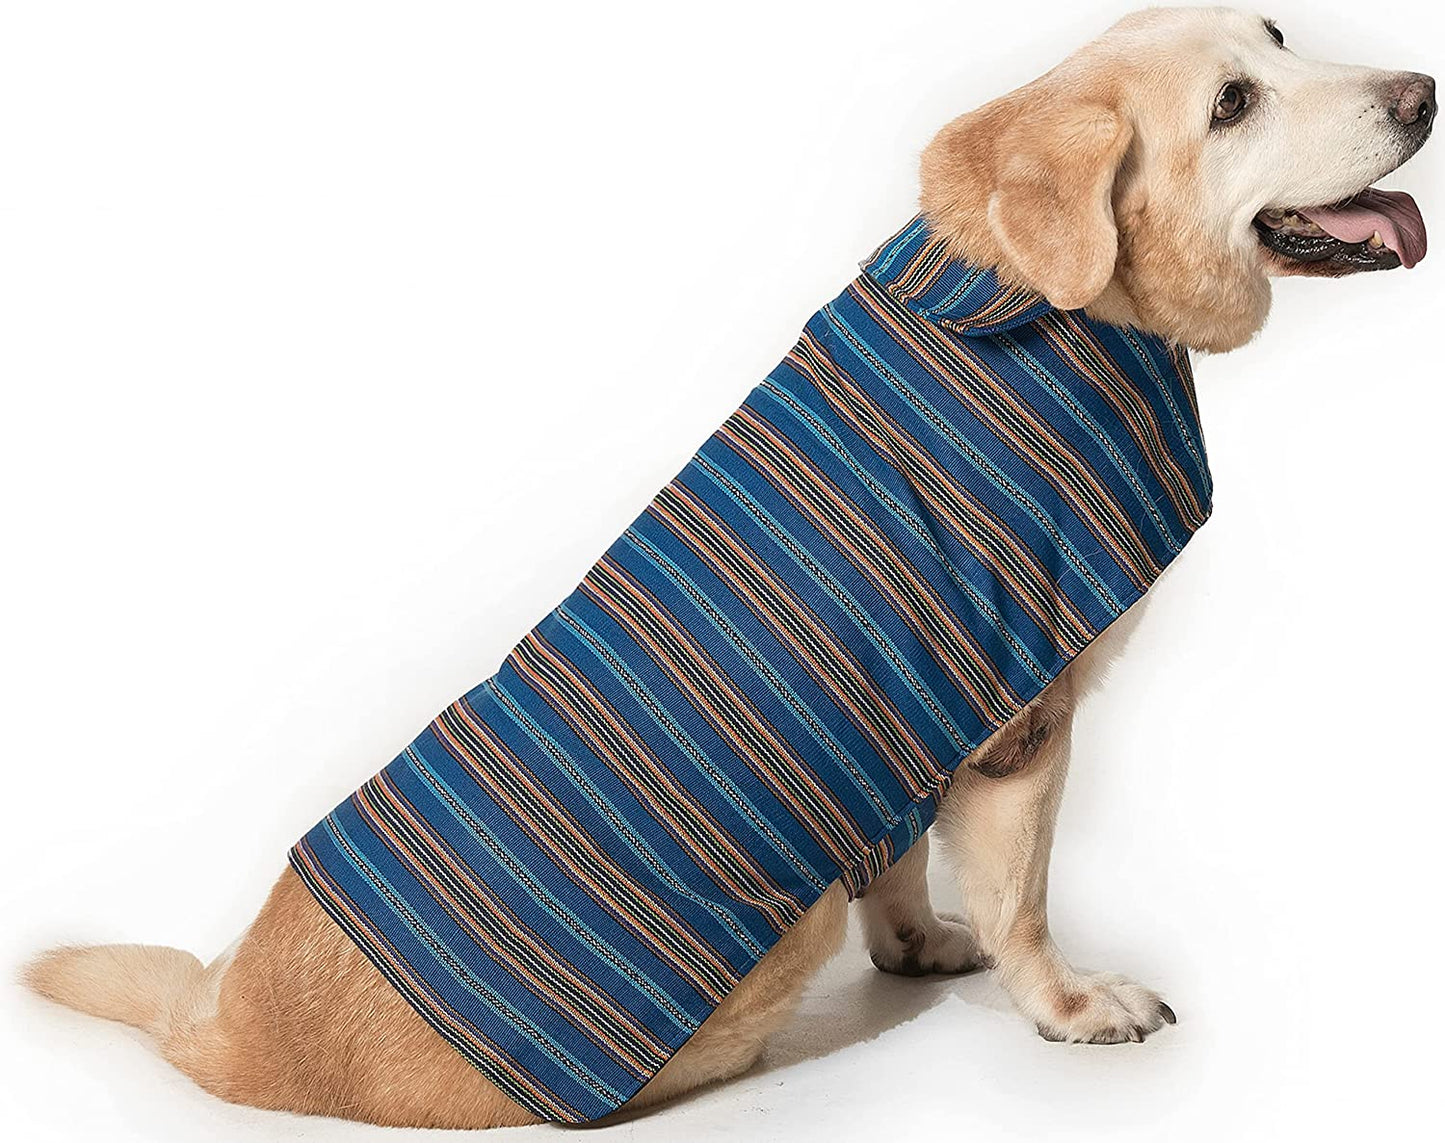 Mayan Dog Clothing for Dogs. Works As, Coat, Sweater, Vest, Jacket, Stress Reliever. for XXS, Small, Medium, Large, XL, XXL Dogs (Any Size) Animals & Pet Supplies > Pet Supplies > Dog Supplies > Dog Apparel Mayan Dog Pink Small 